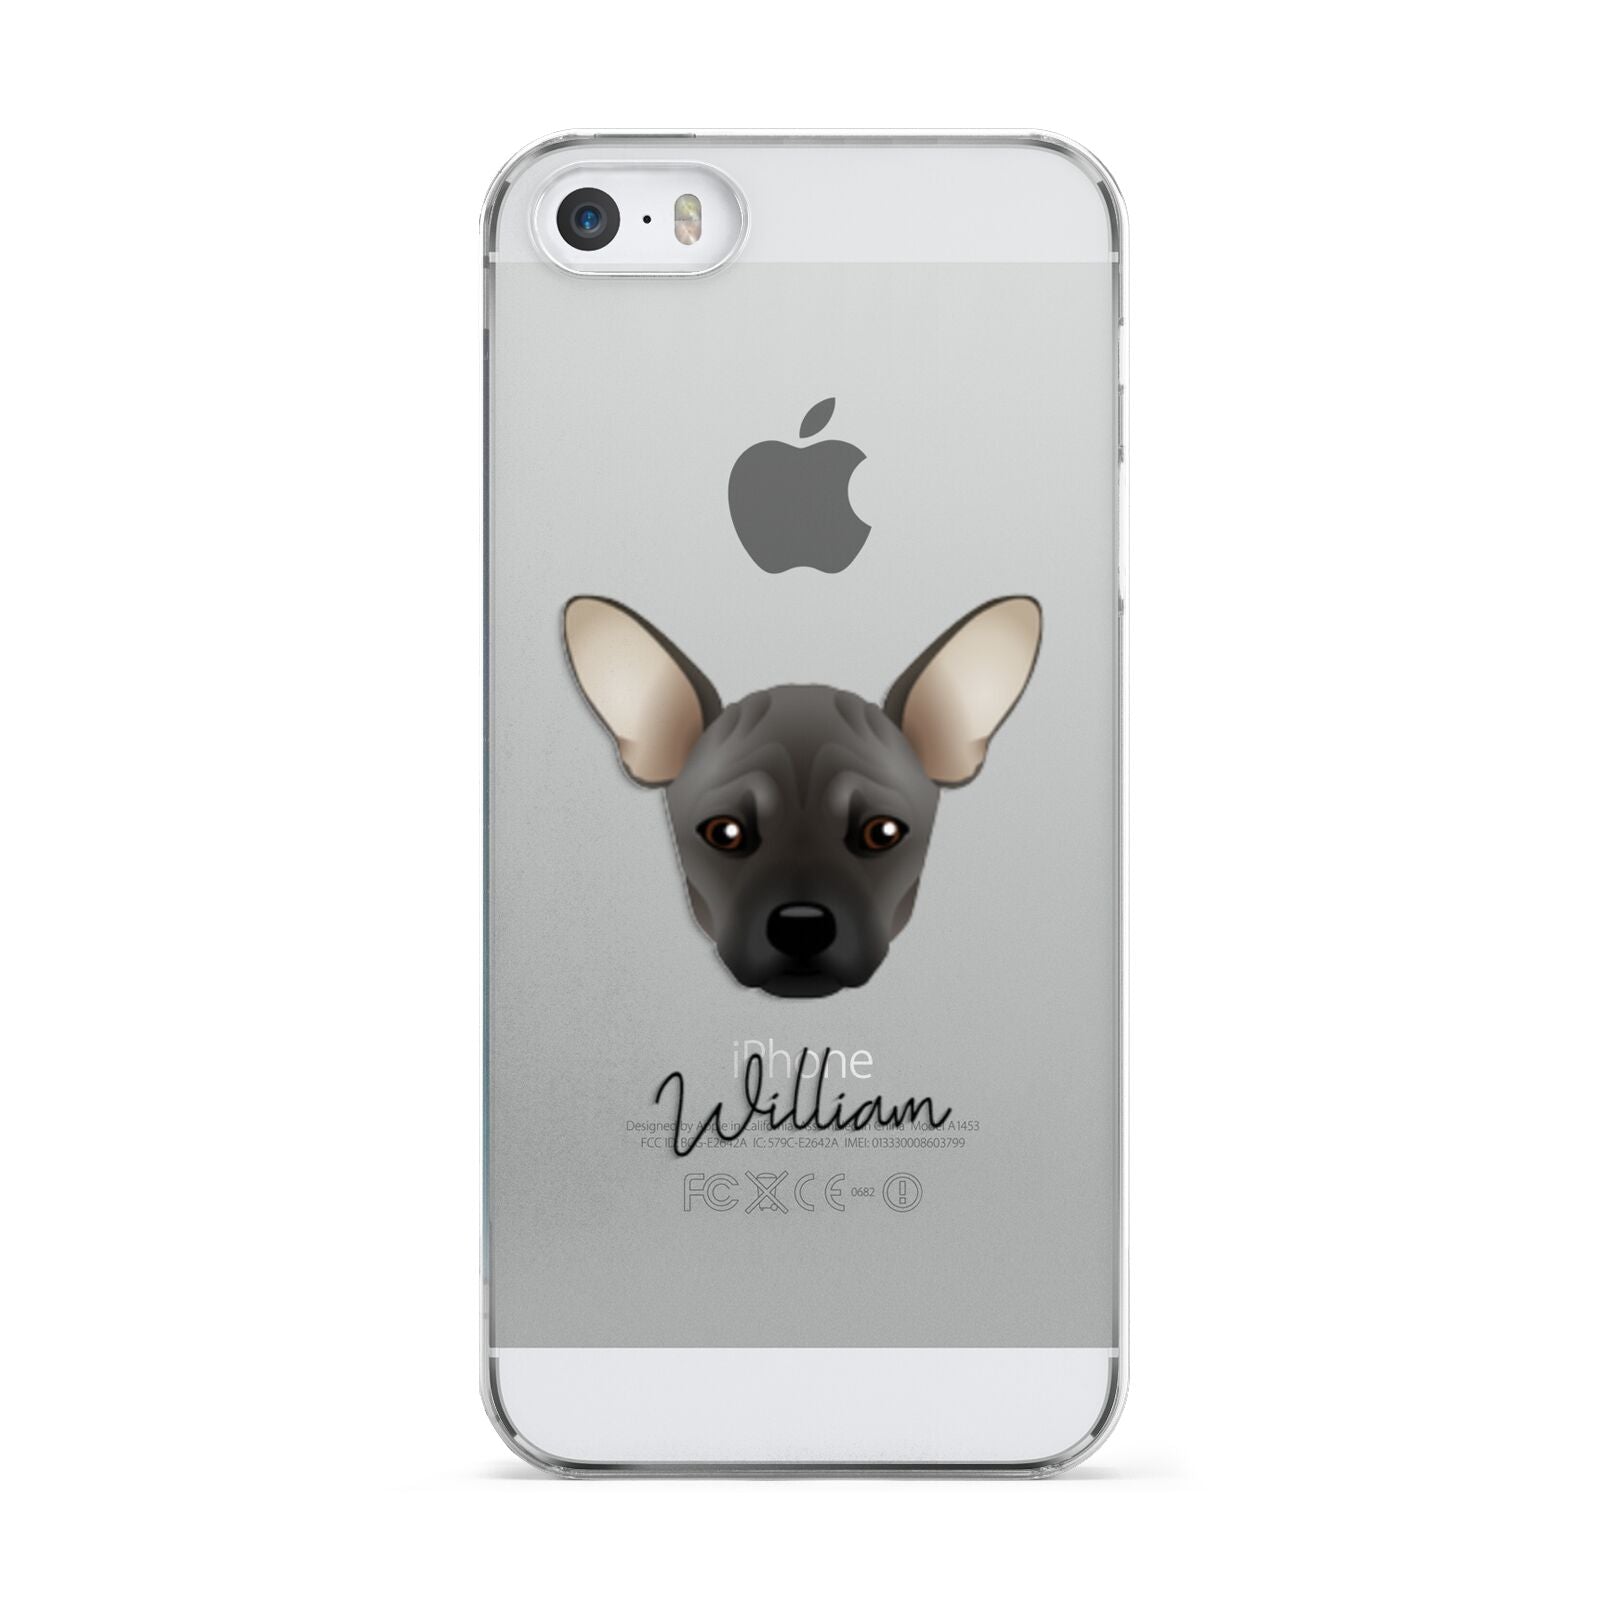 French Pin Personalised Apple iPhone 5 Case